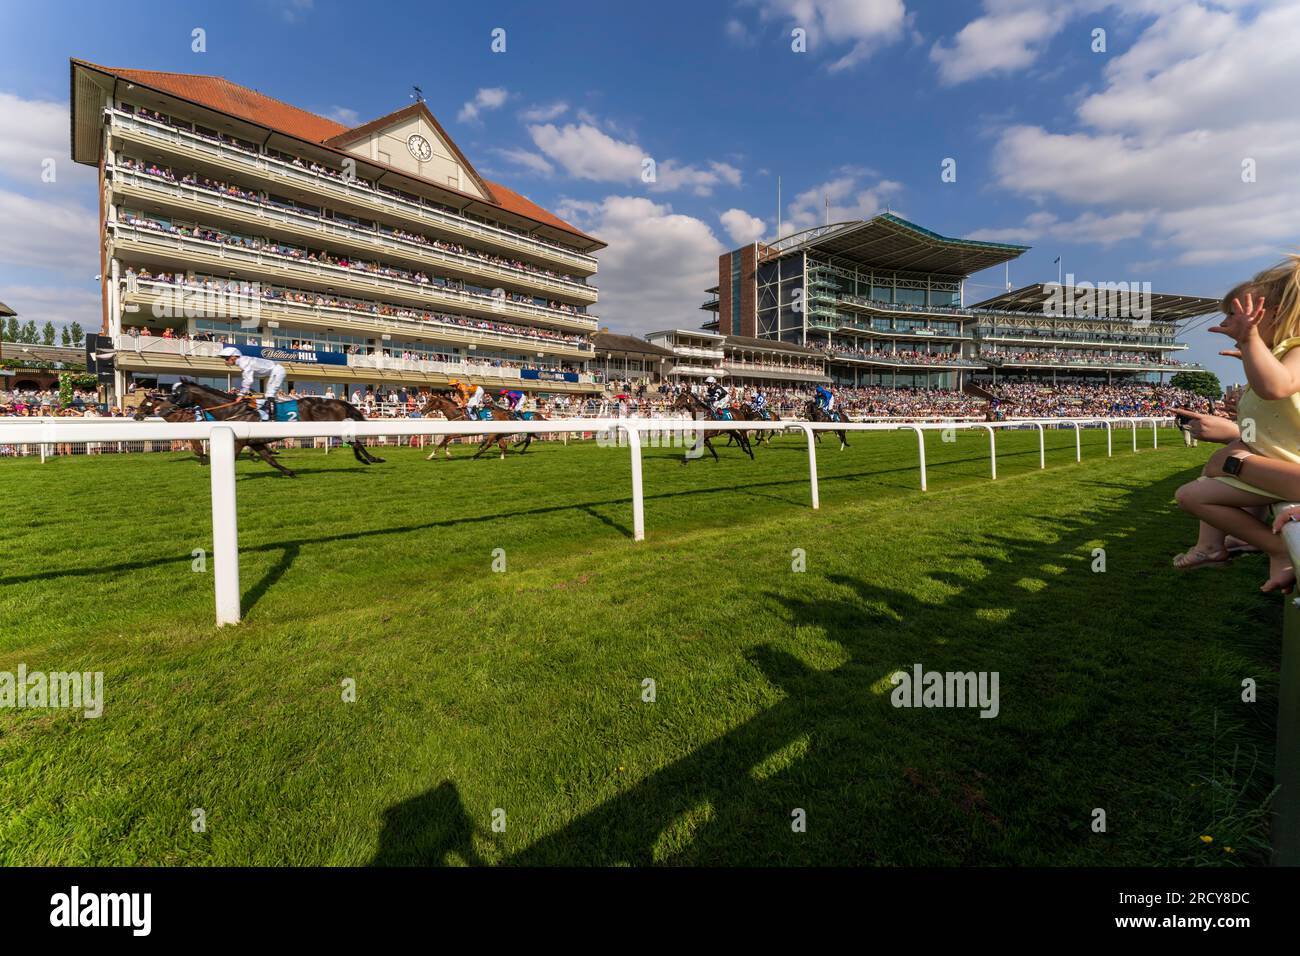 York horse race, fans cheer as race horses approach the finish line. Horse racing days are major events in England, UK, part of the British culture. Stock Photo